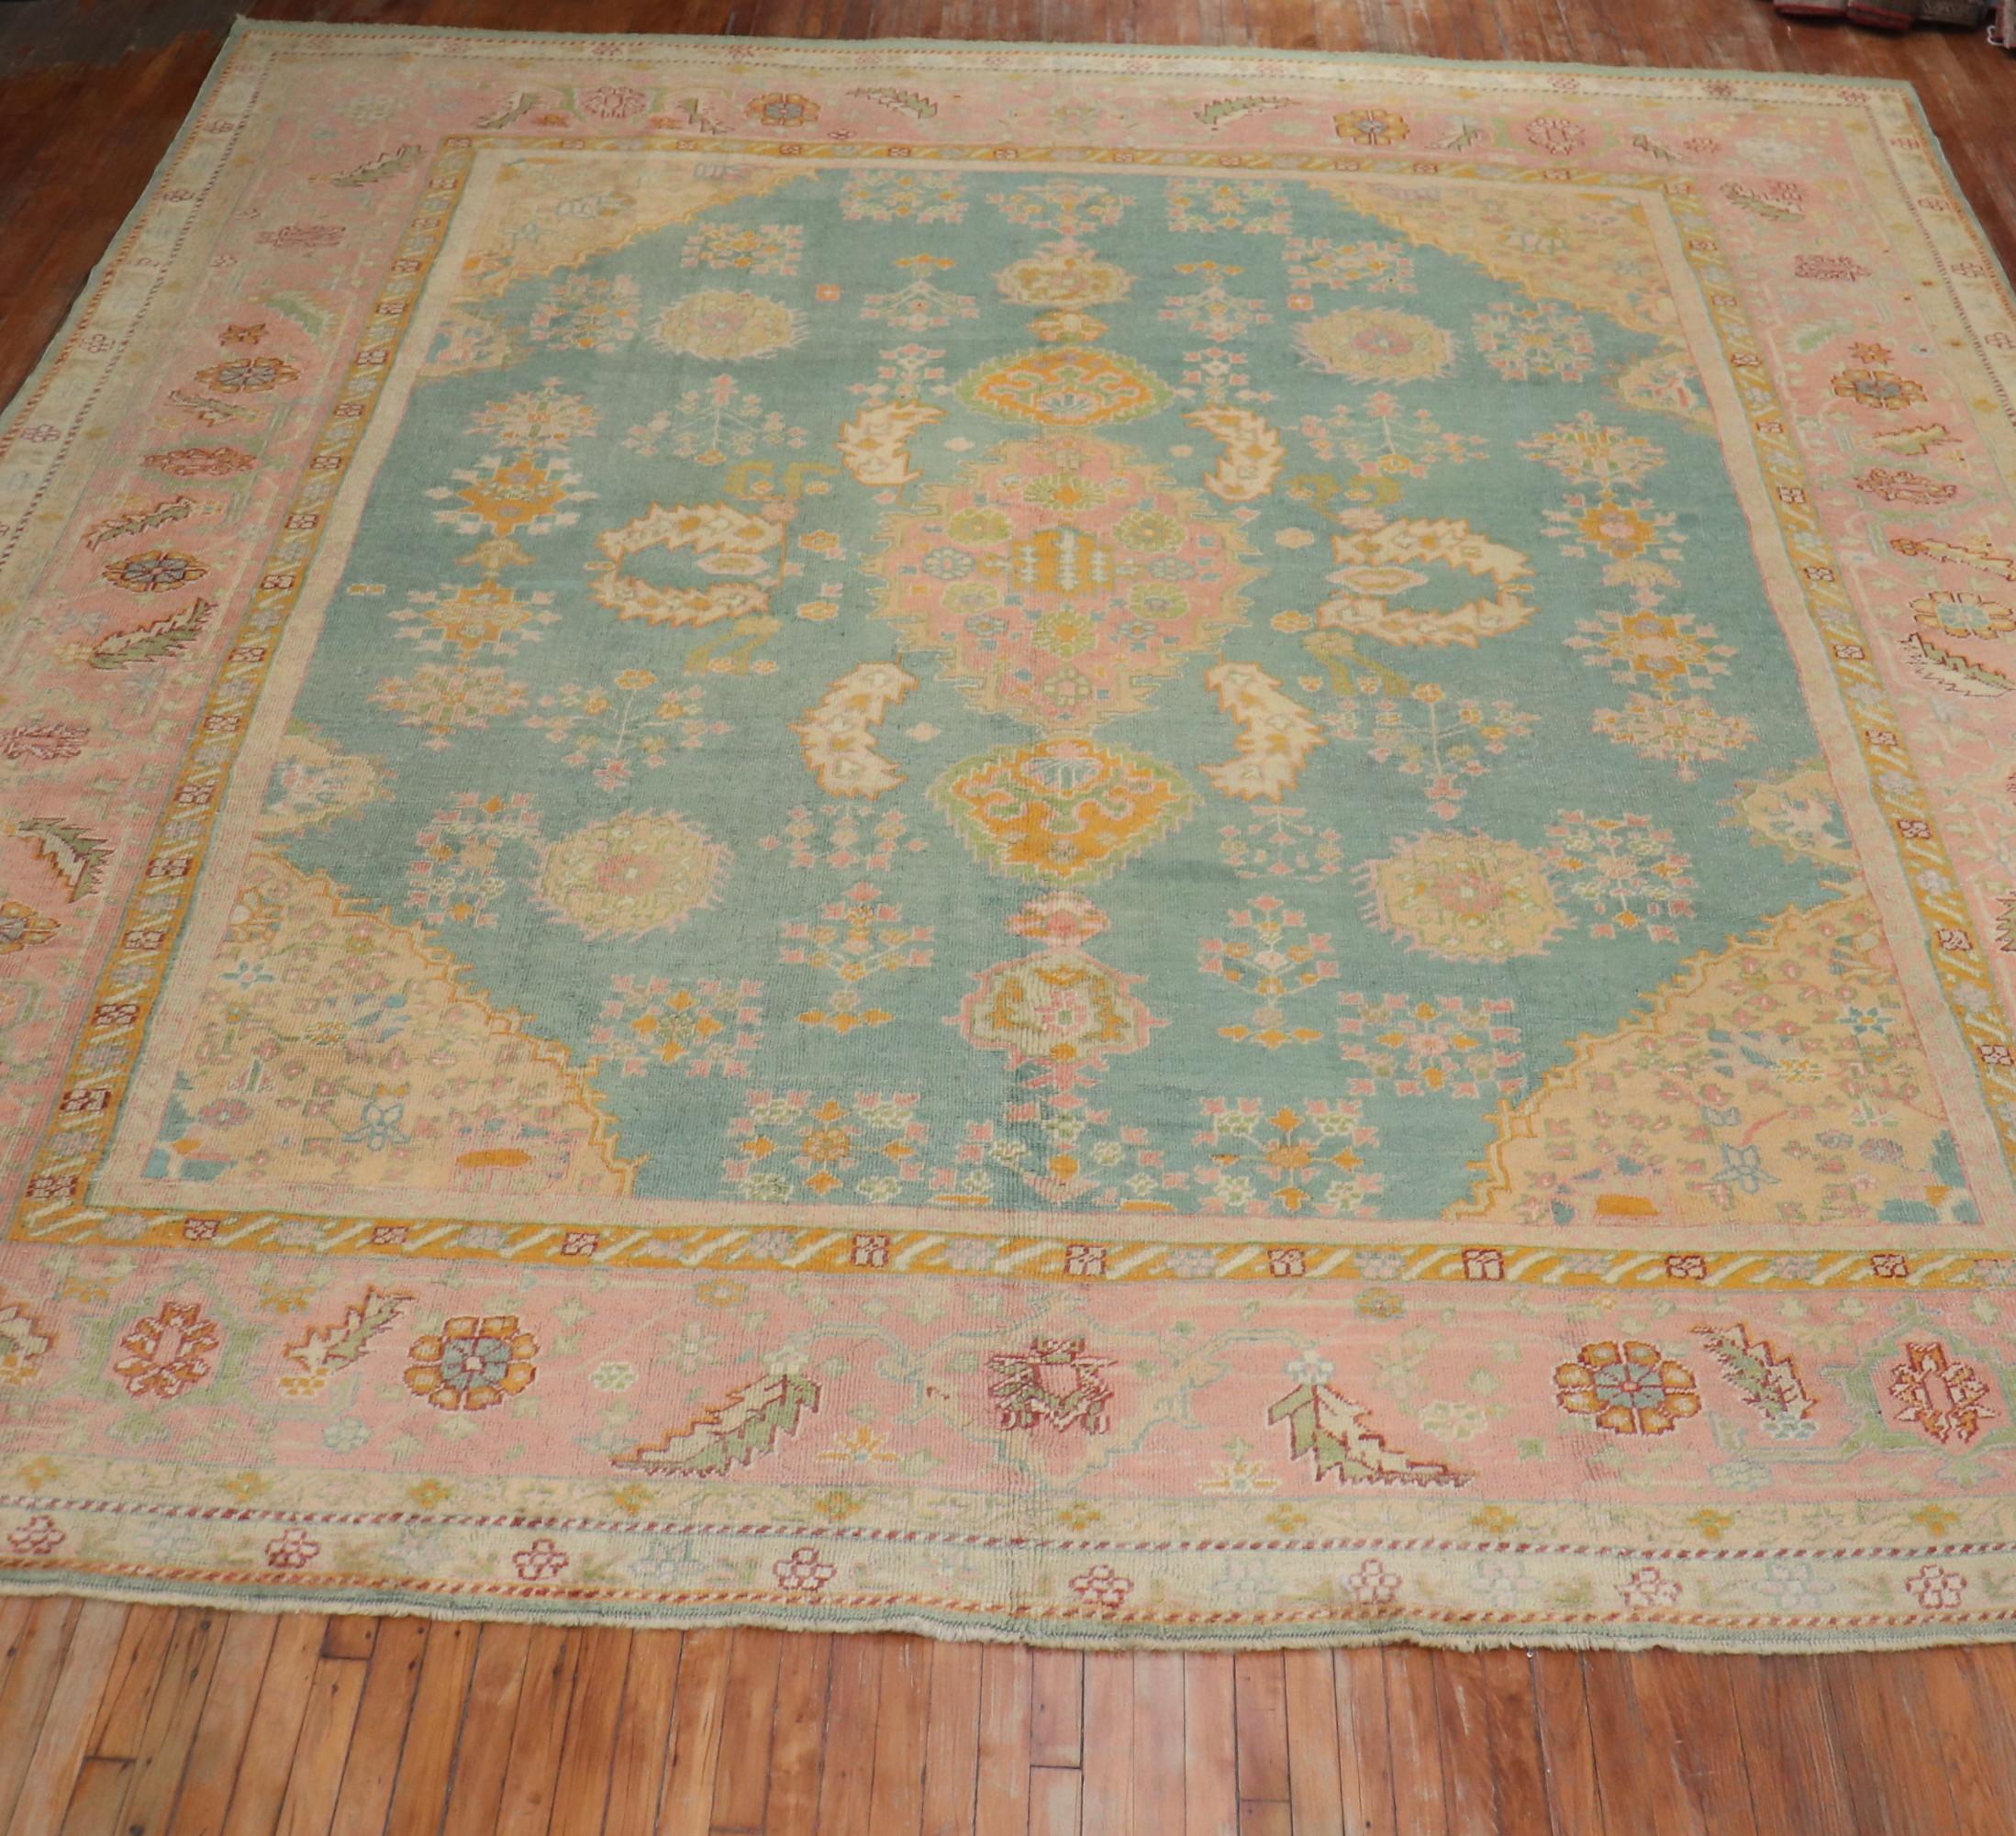 A colorful antique early 20th century Turkish Oushak rug. The field is teal; the border is pink. The rug has a lot of character and exhilarating in person

Measures: 13'4” x 15'8”

Antique Turkish Oushak rugs have been woven in Western Turkey